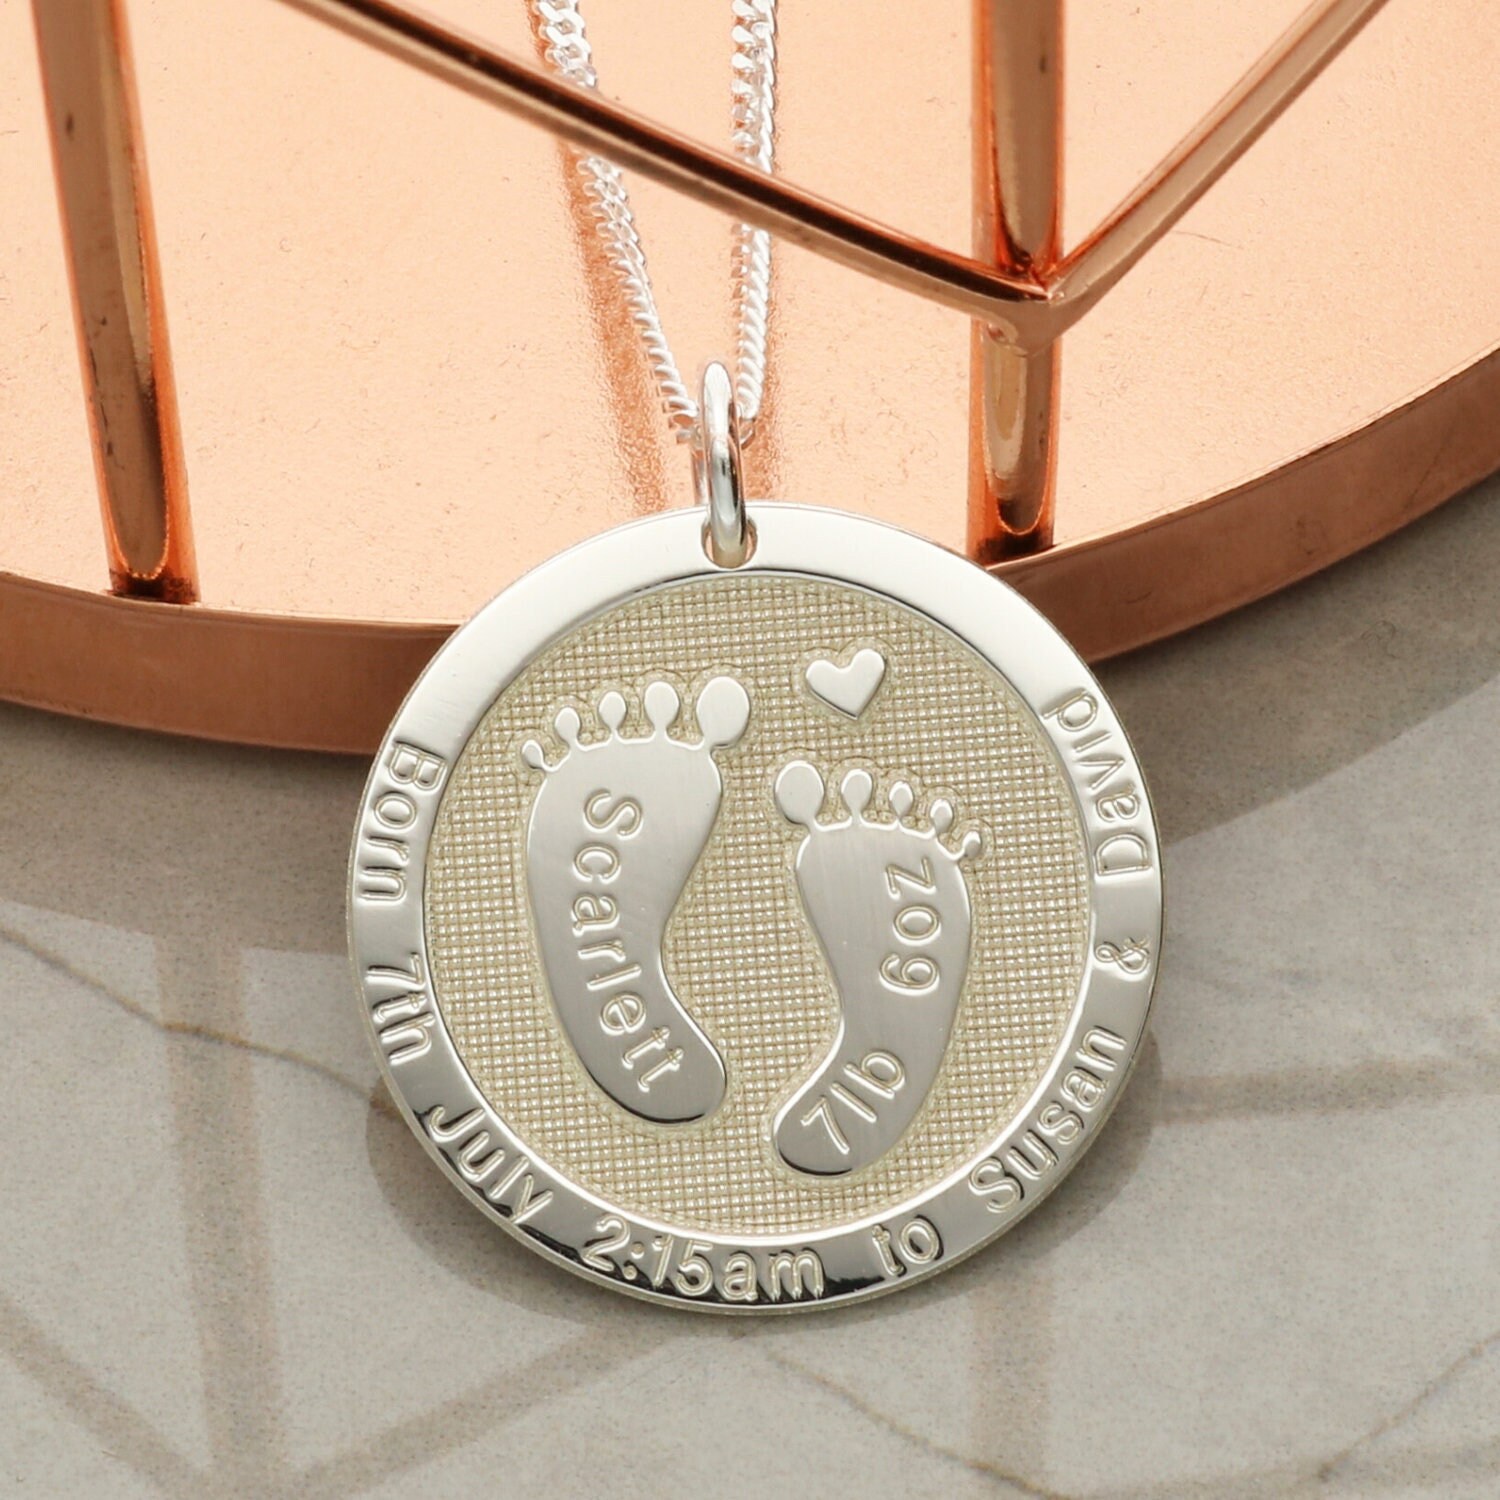 Actual Footprint Necklace Personalized Footprint to Handprint Necklace  Mother or Baby Gift Footprint Charm Mothers Day Gift - Etsy